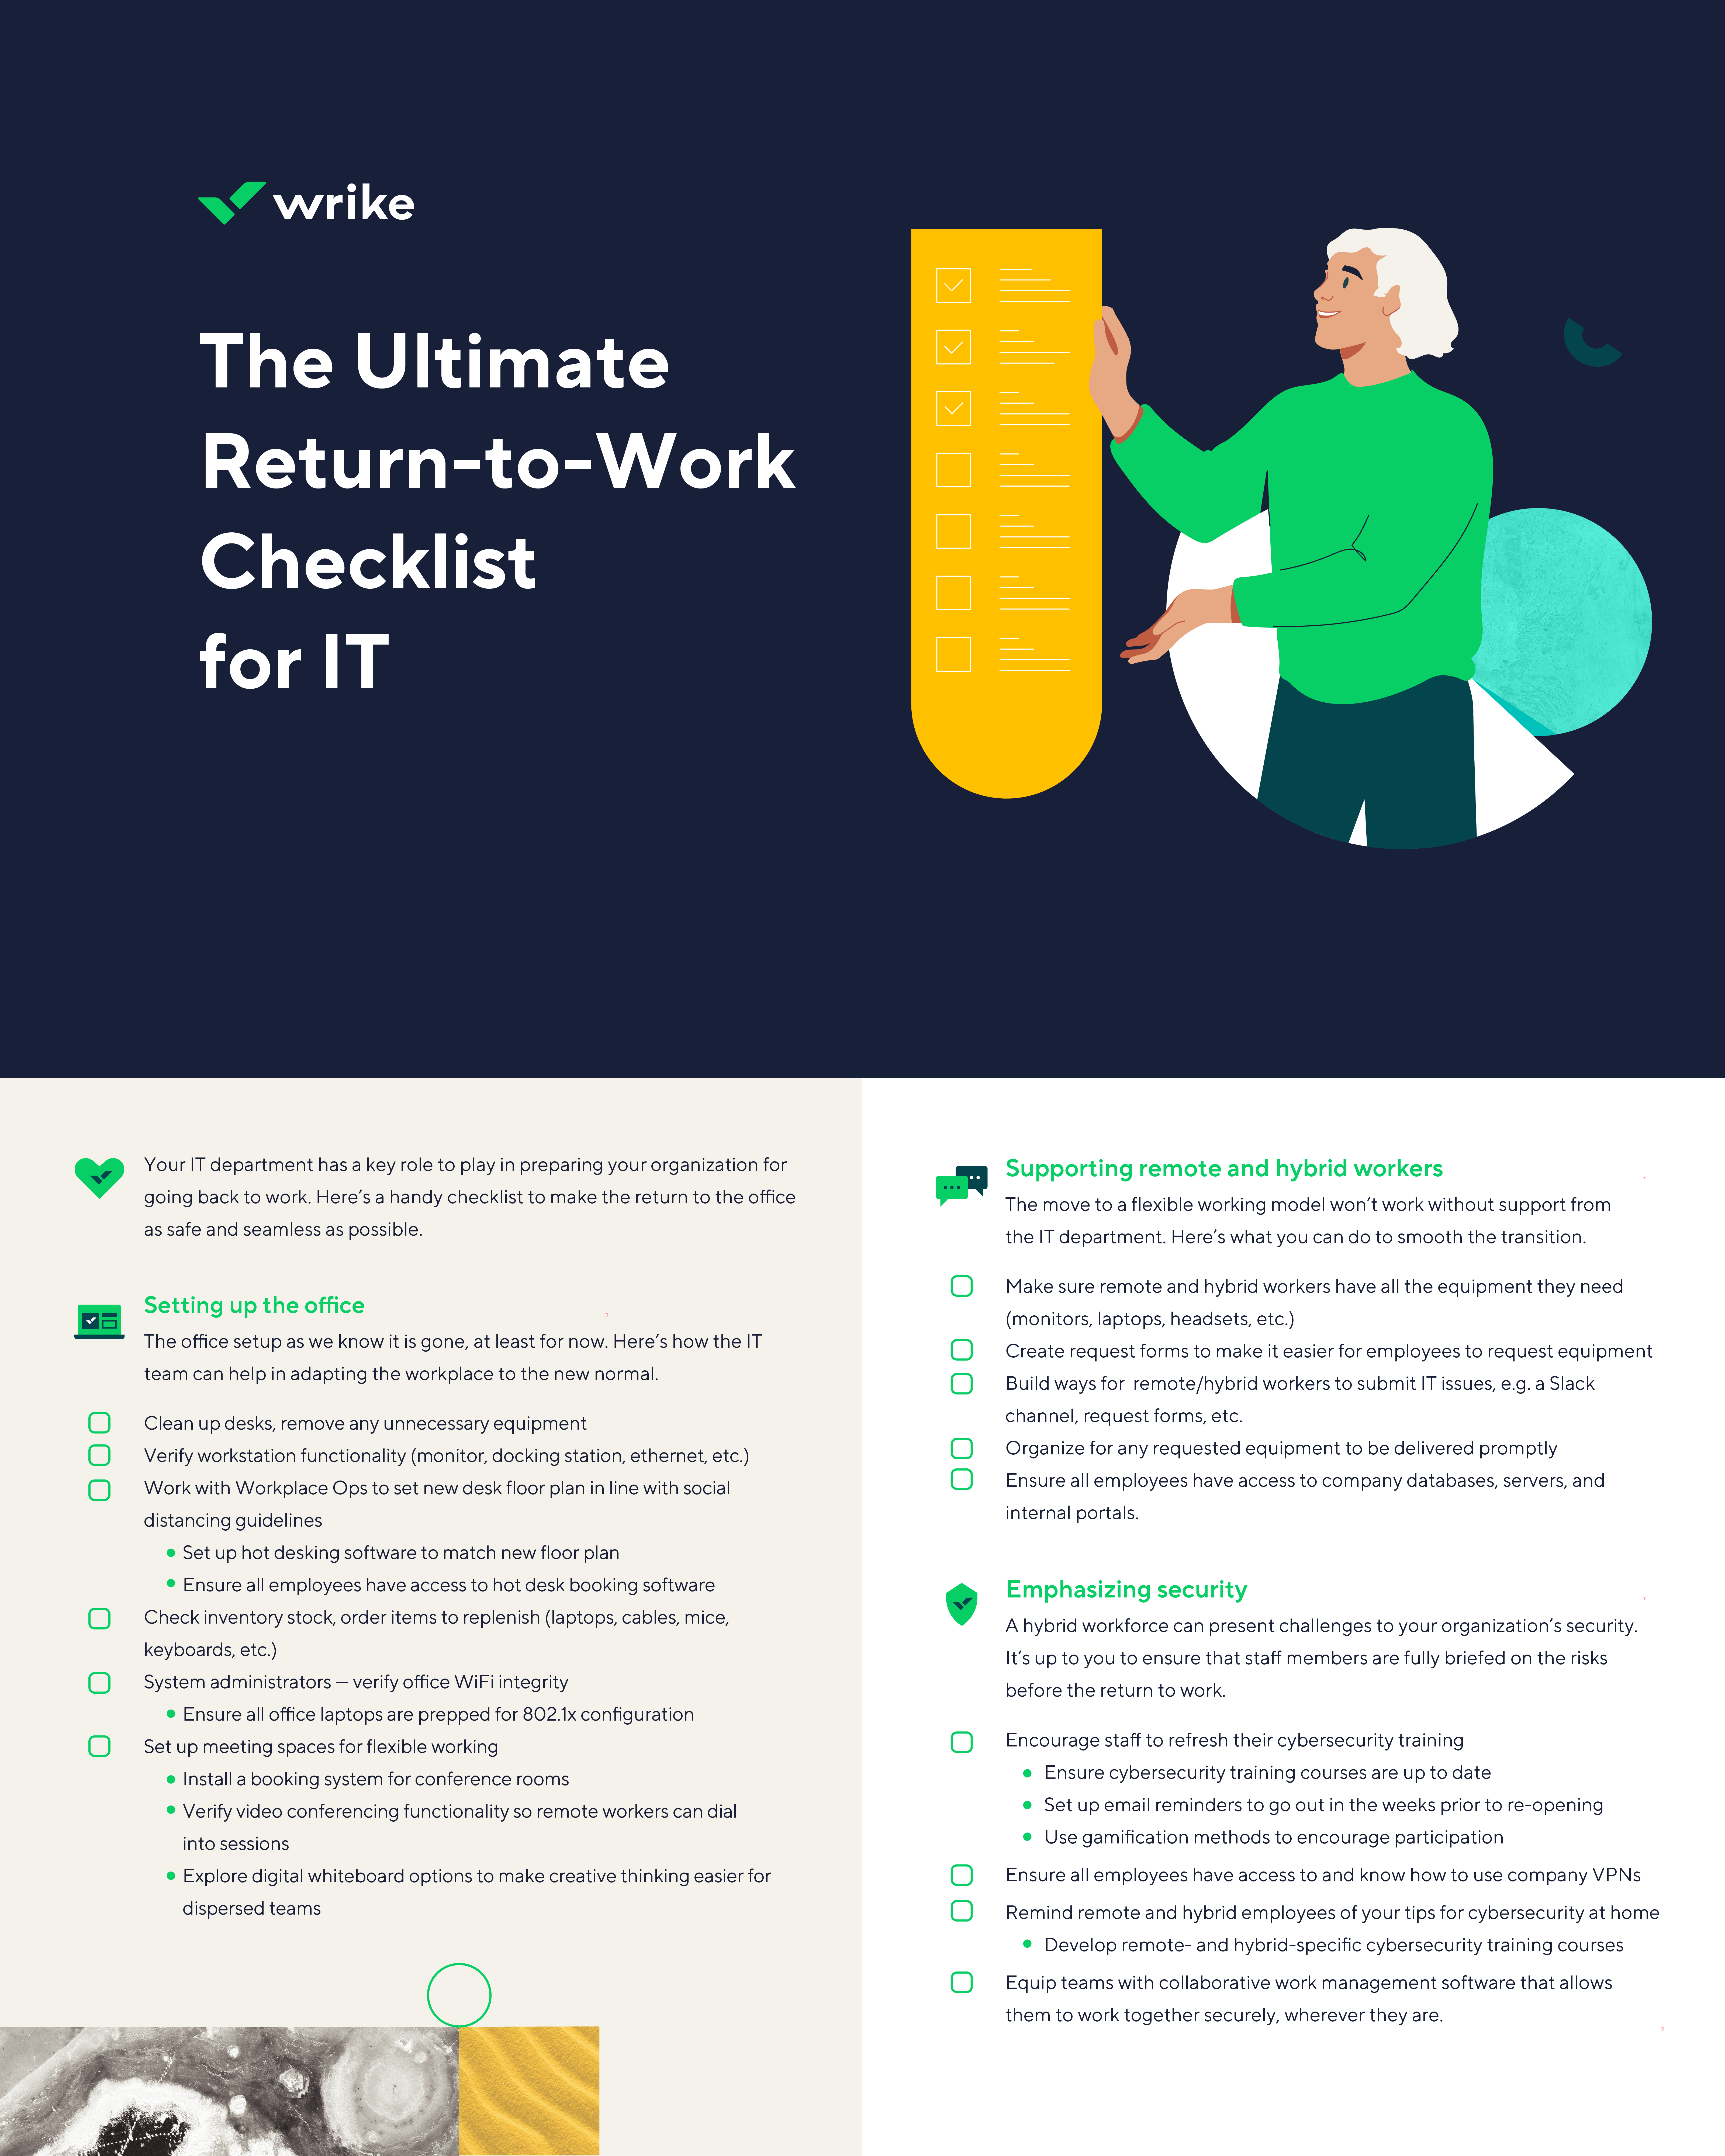 The Ultimate Return-to-Work Checklist for IT (Infographic) 2